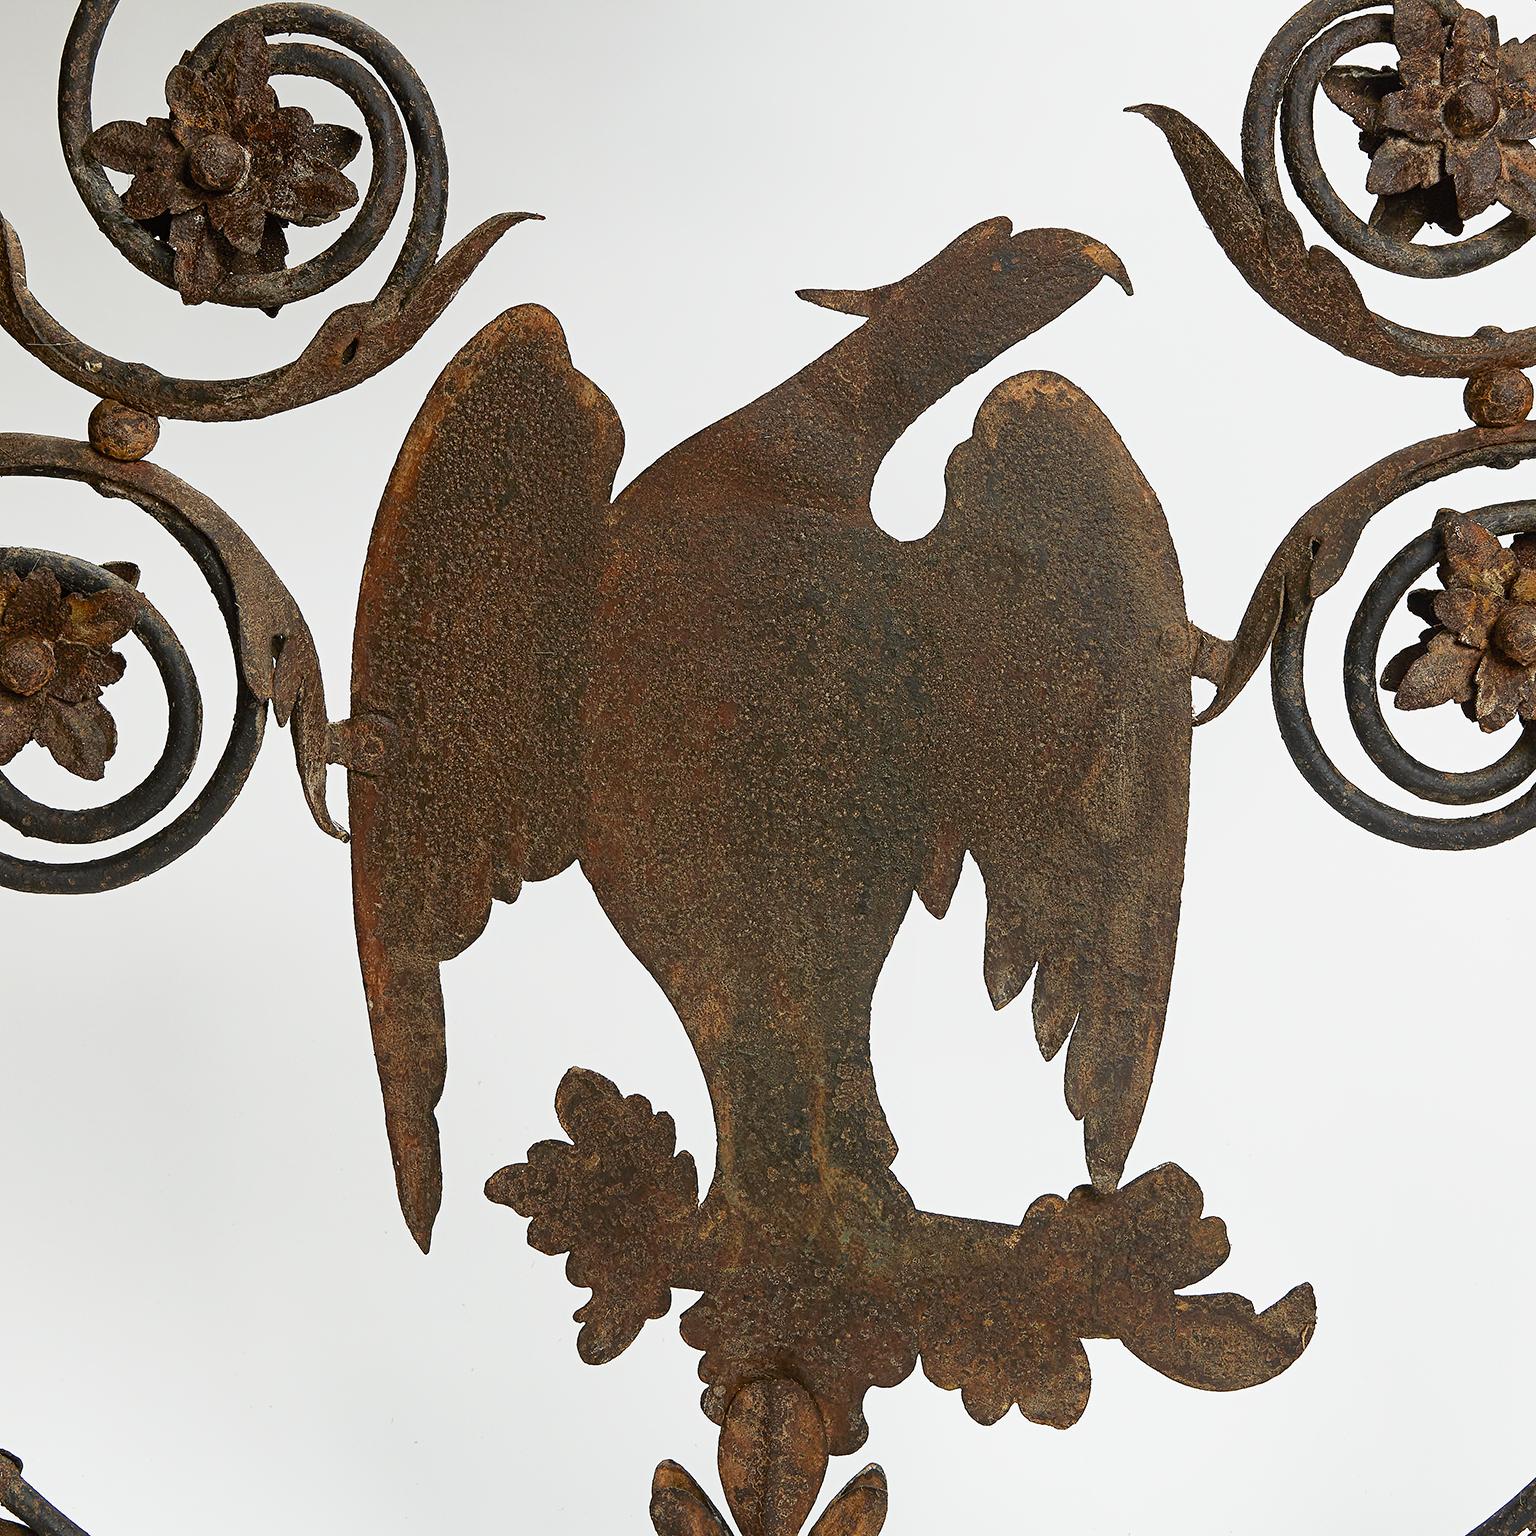 A stunning hand-made 18th century Italian Wrough Iron Sign with Eagle, an Italian sign in hand-forged wrought iron, ready to hang either outdoors or indoors as a decorative element. A double shaped frame decorated with scrolls, floral and plant